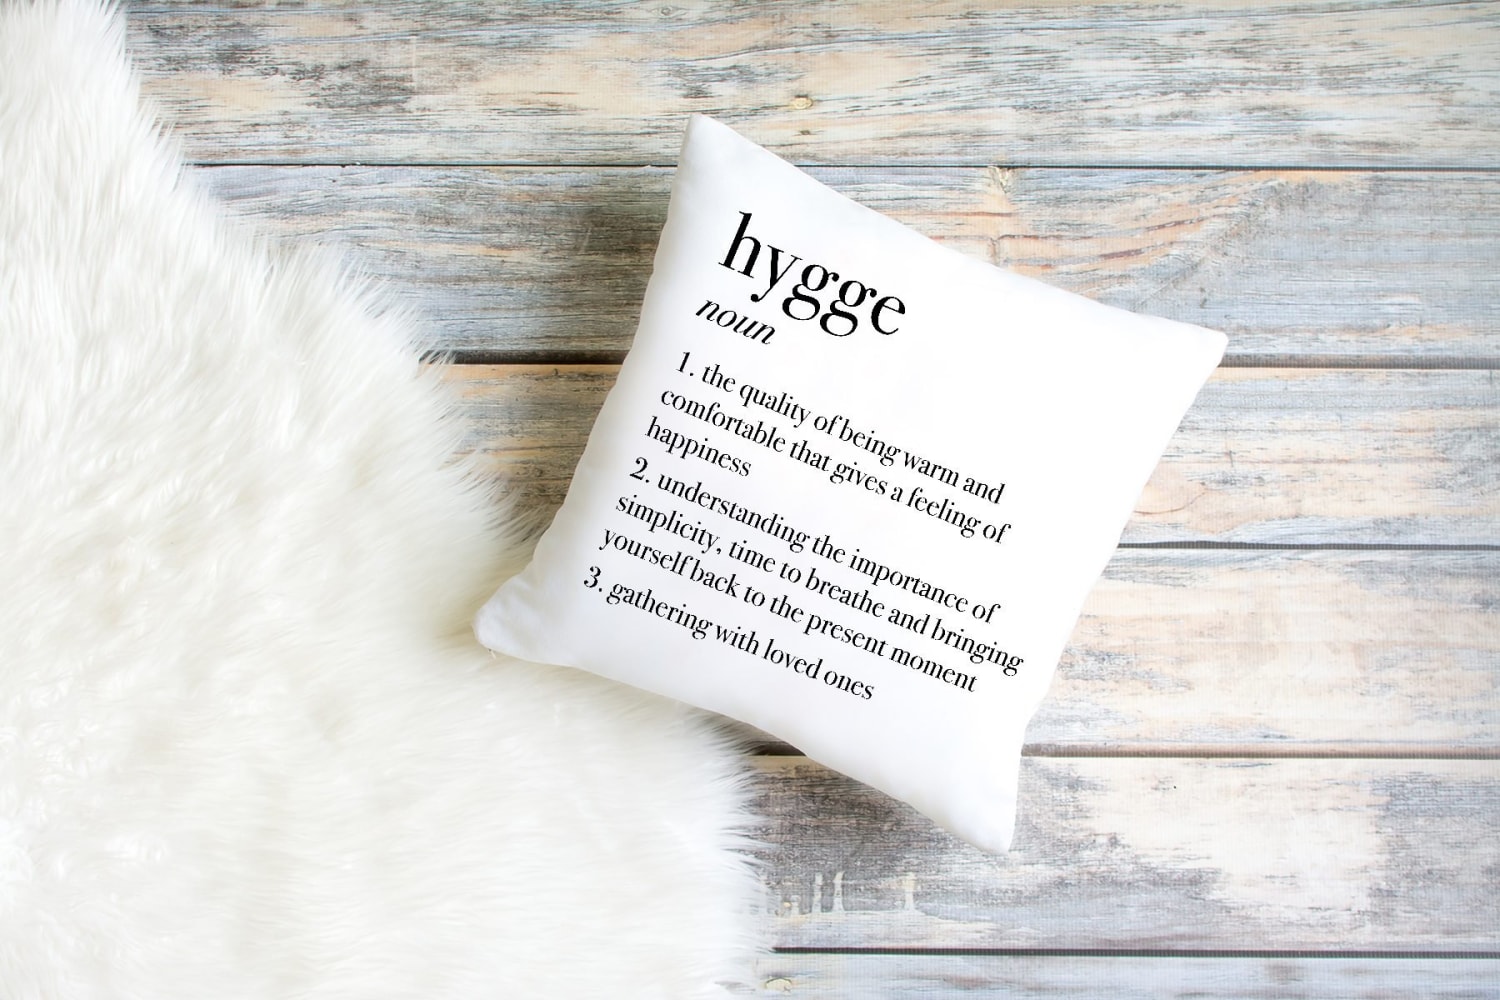 Want to live like a Scandinavian? Here's how to bring 'hygge' into your home